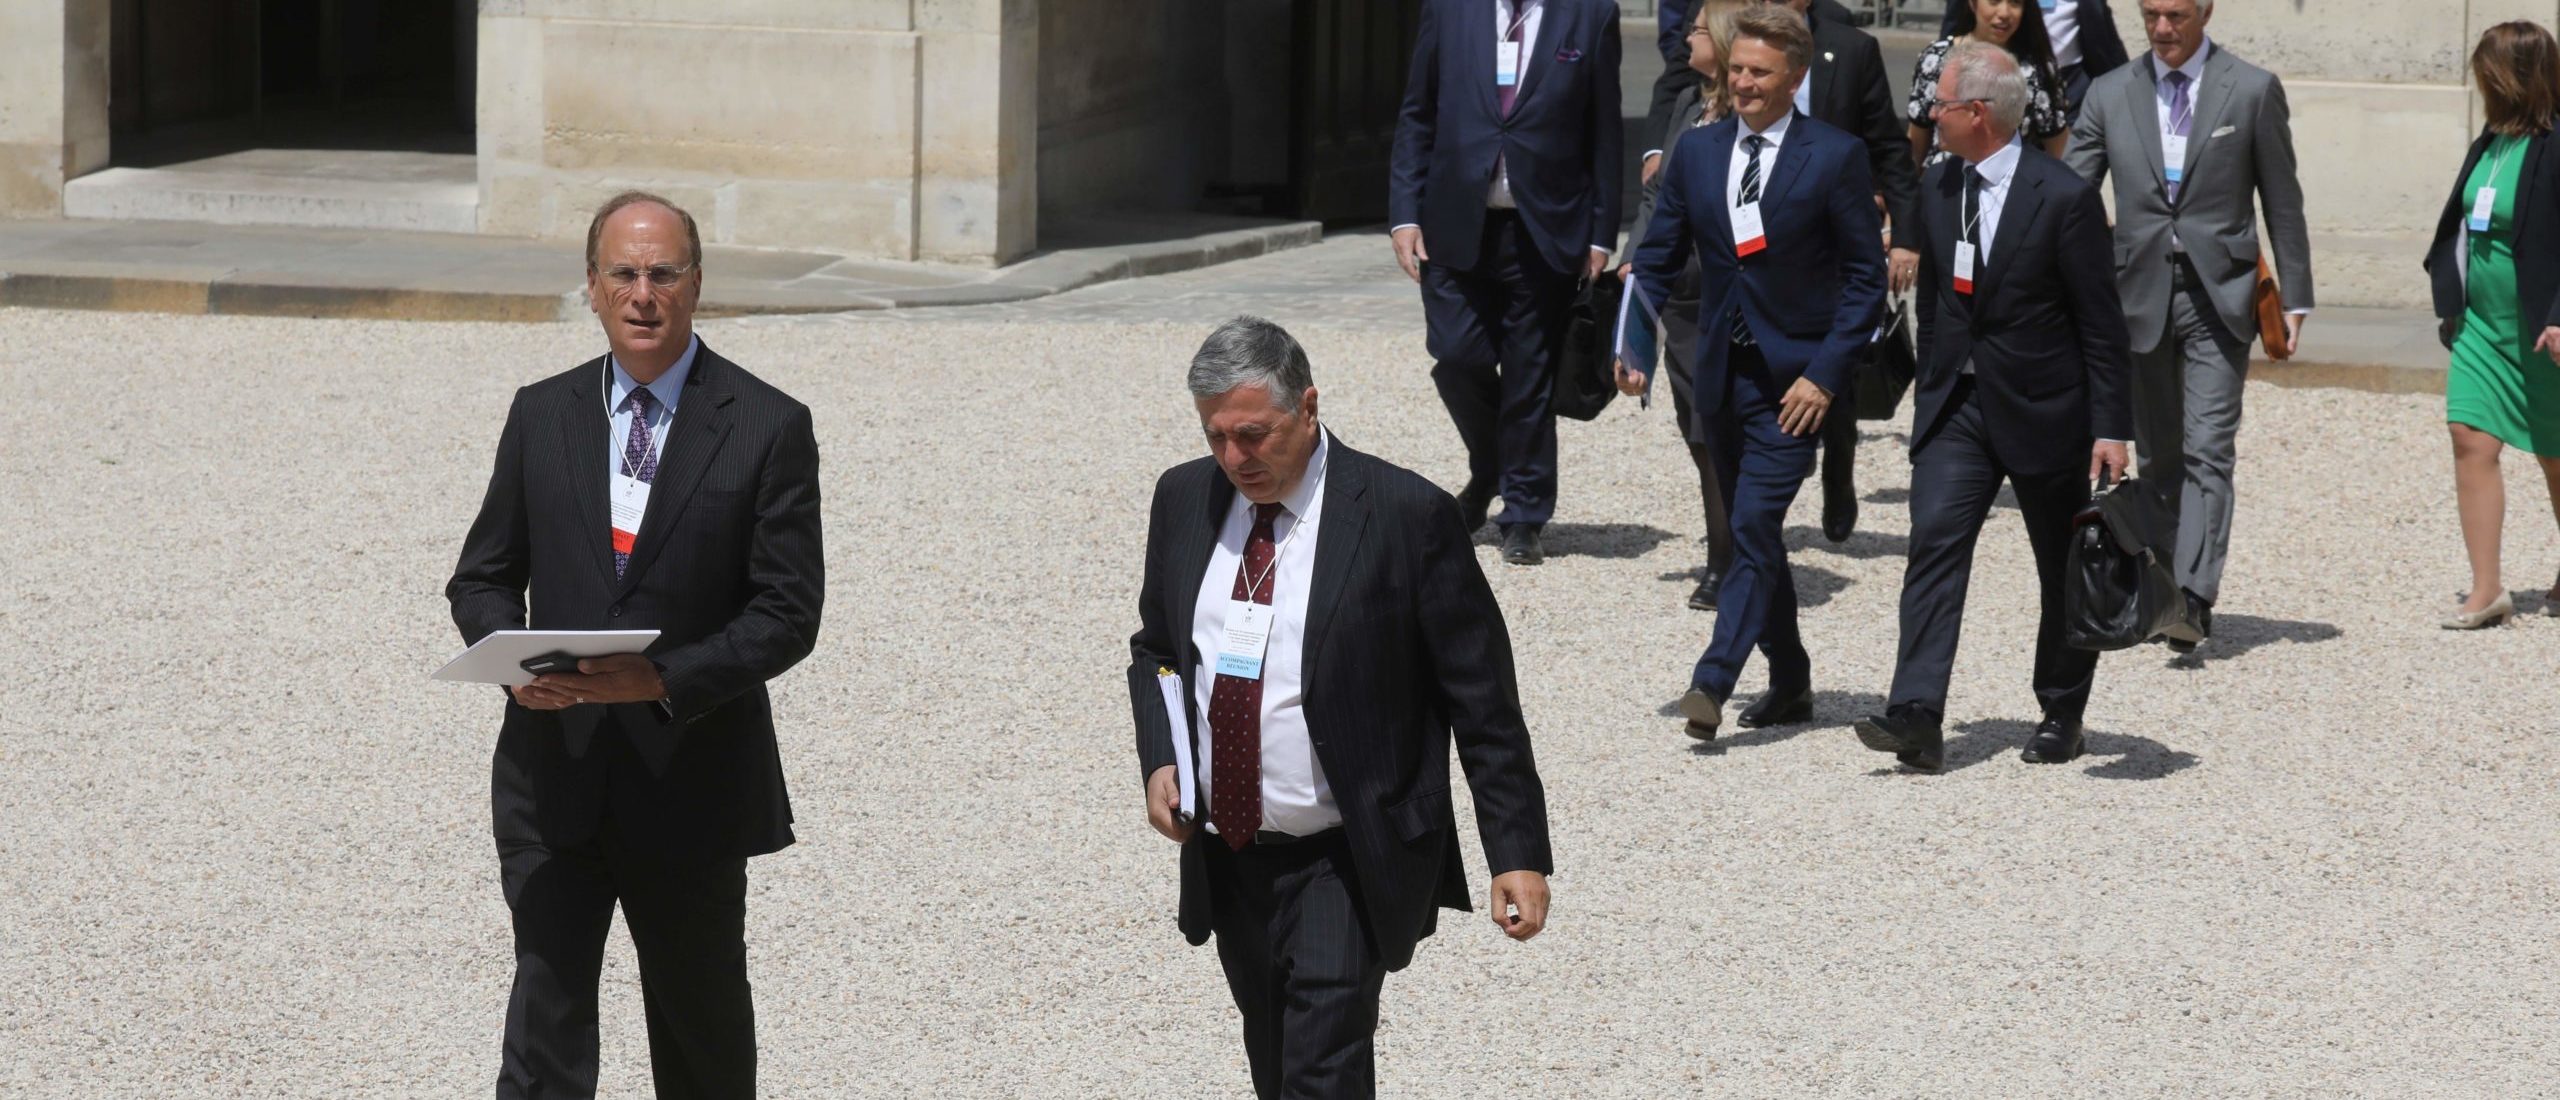 Chairman and CEO of BlackRock, Larry Fink (L) and CEO of Blackrock France, Jean-Francois Cirelli, attend a meeting about climate action investments with heads of sovereign wealth funds and French President Emmanuel Macron, at the Elysee Palace, in Paris on July 10, 2019. (Photo by Ludovic MARIN / AFP)